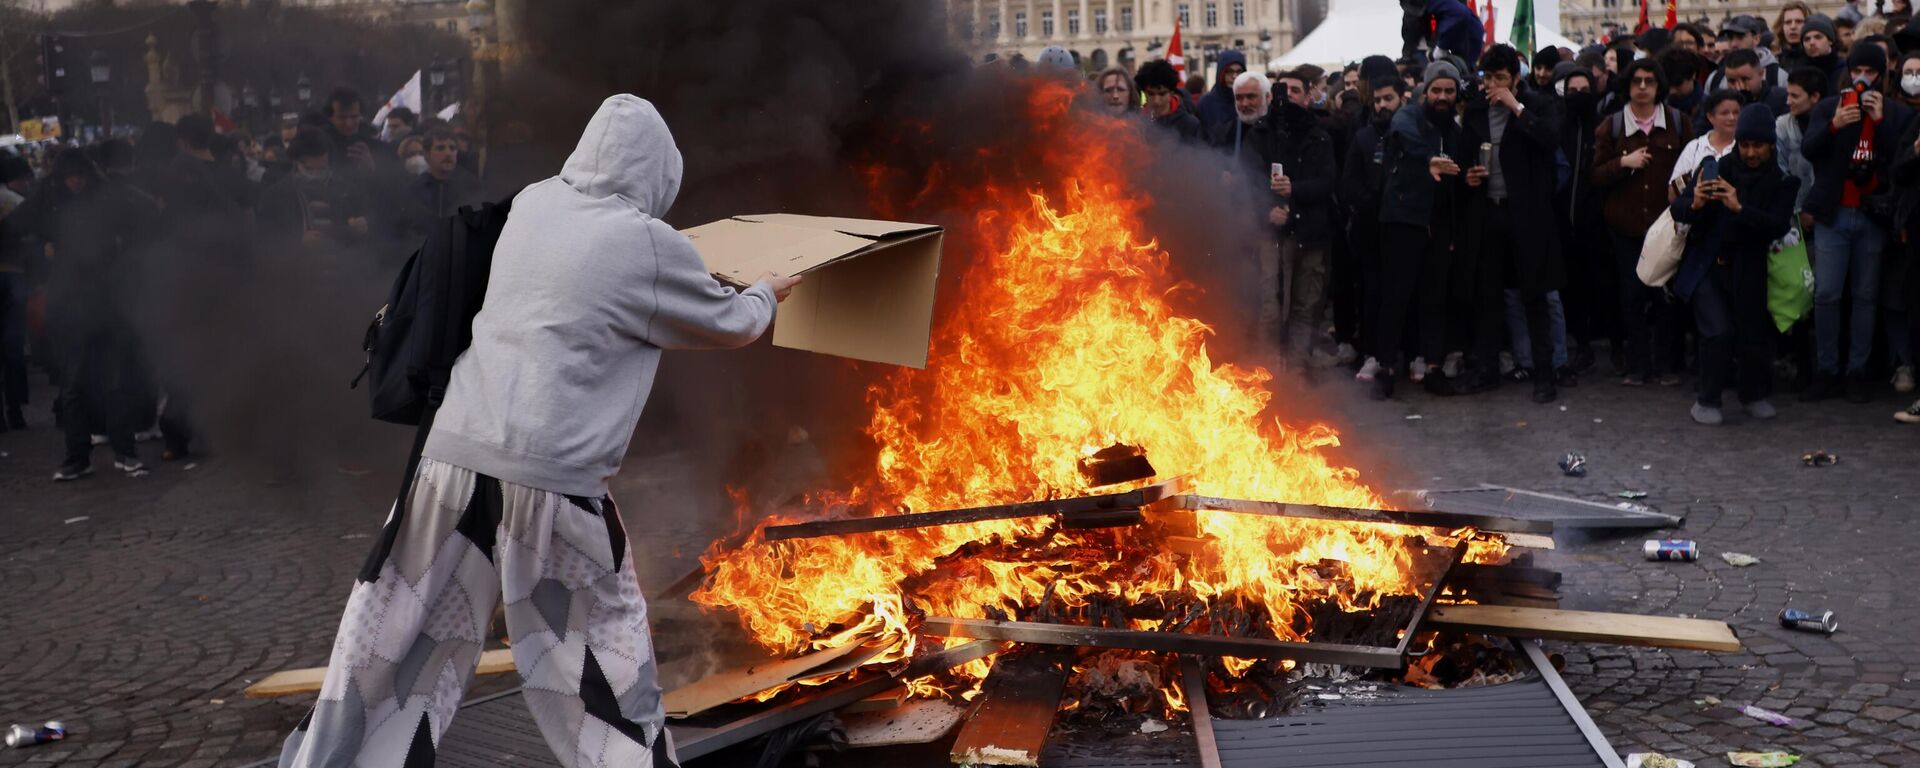 A protester throws a cardboard to feed burning pallets during a demonstration at Concorde square near the National Assembly in Paris, Thursday, March 16, 2023.  - Sputnik International, 1920, 17.03.2023